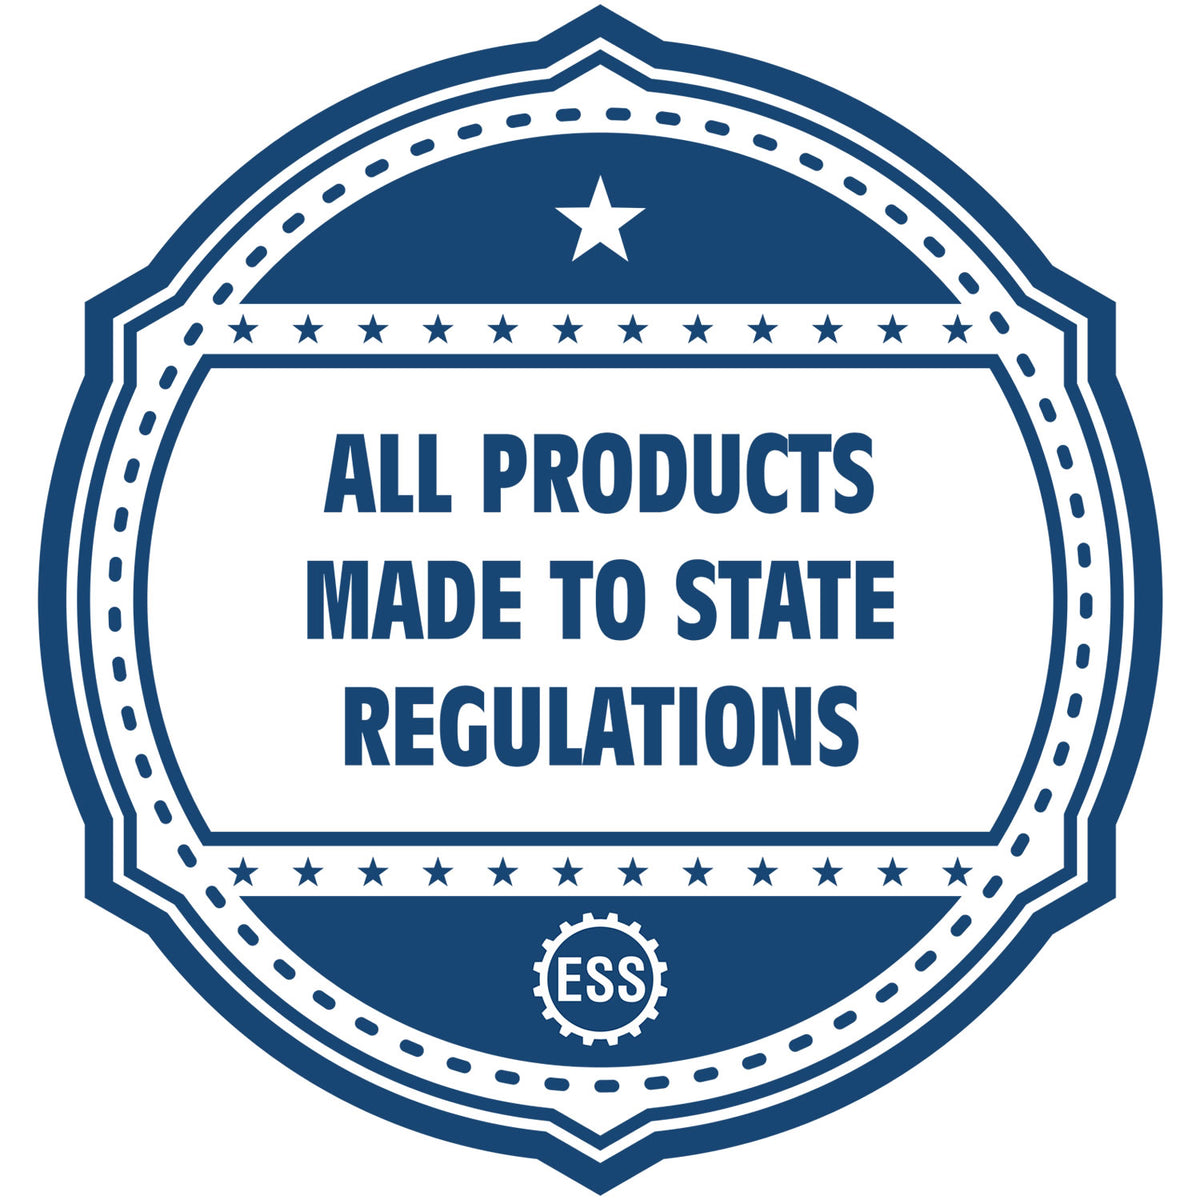 An icon or badge element for the Digital District of Columbia Landscape Architect Stamp showing that this product is made in compliance with state regulations.